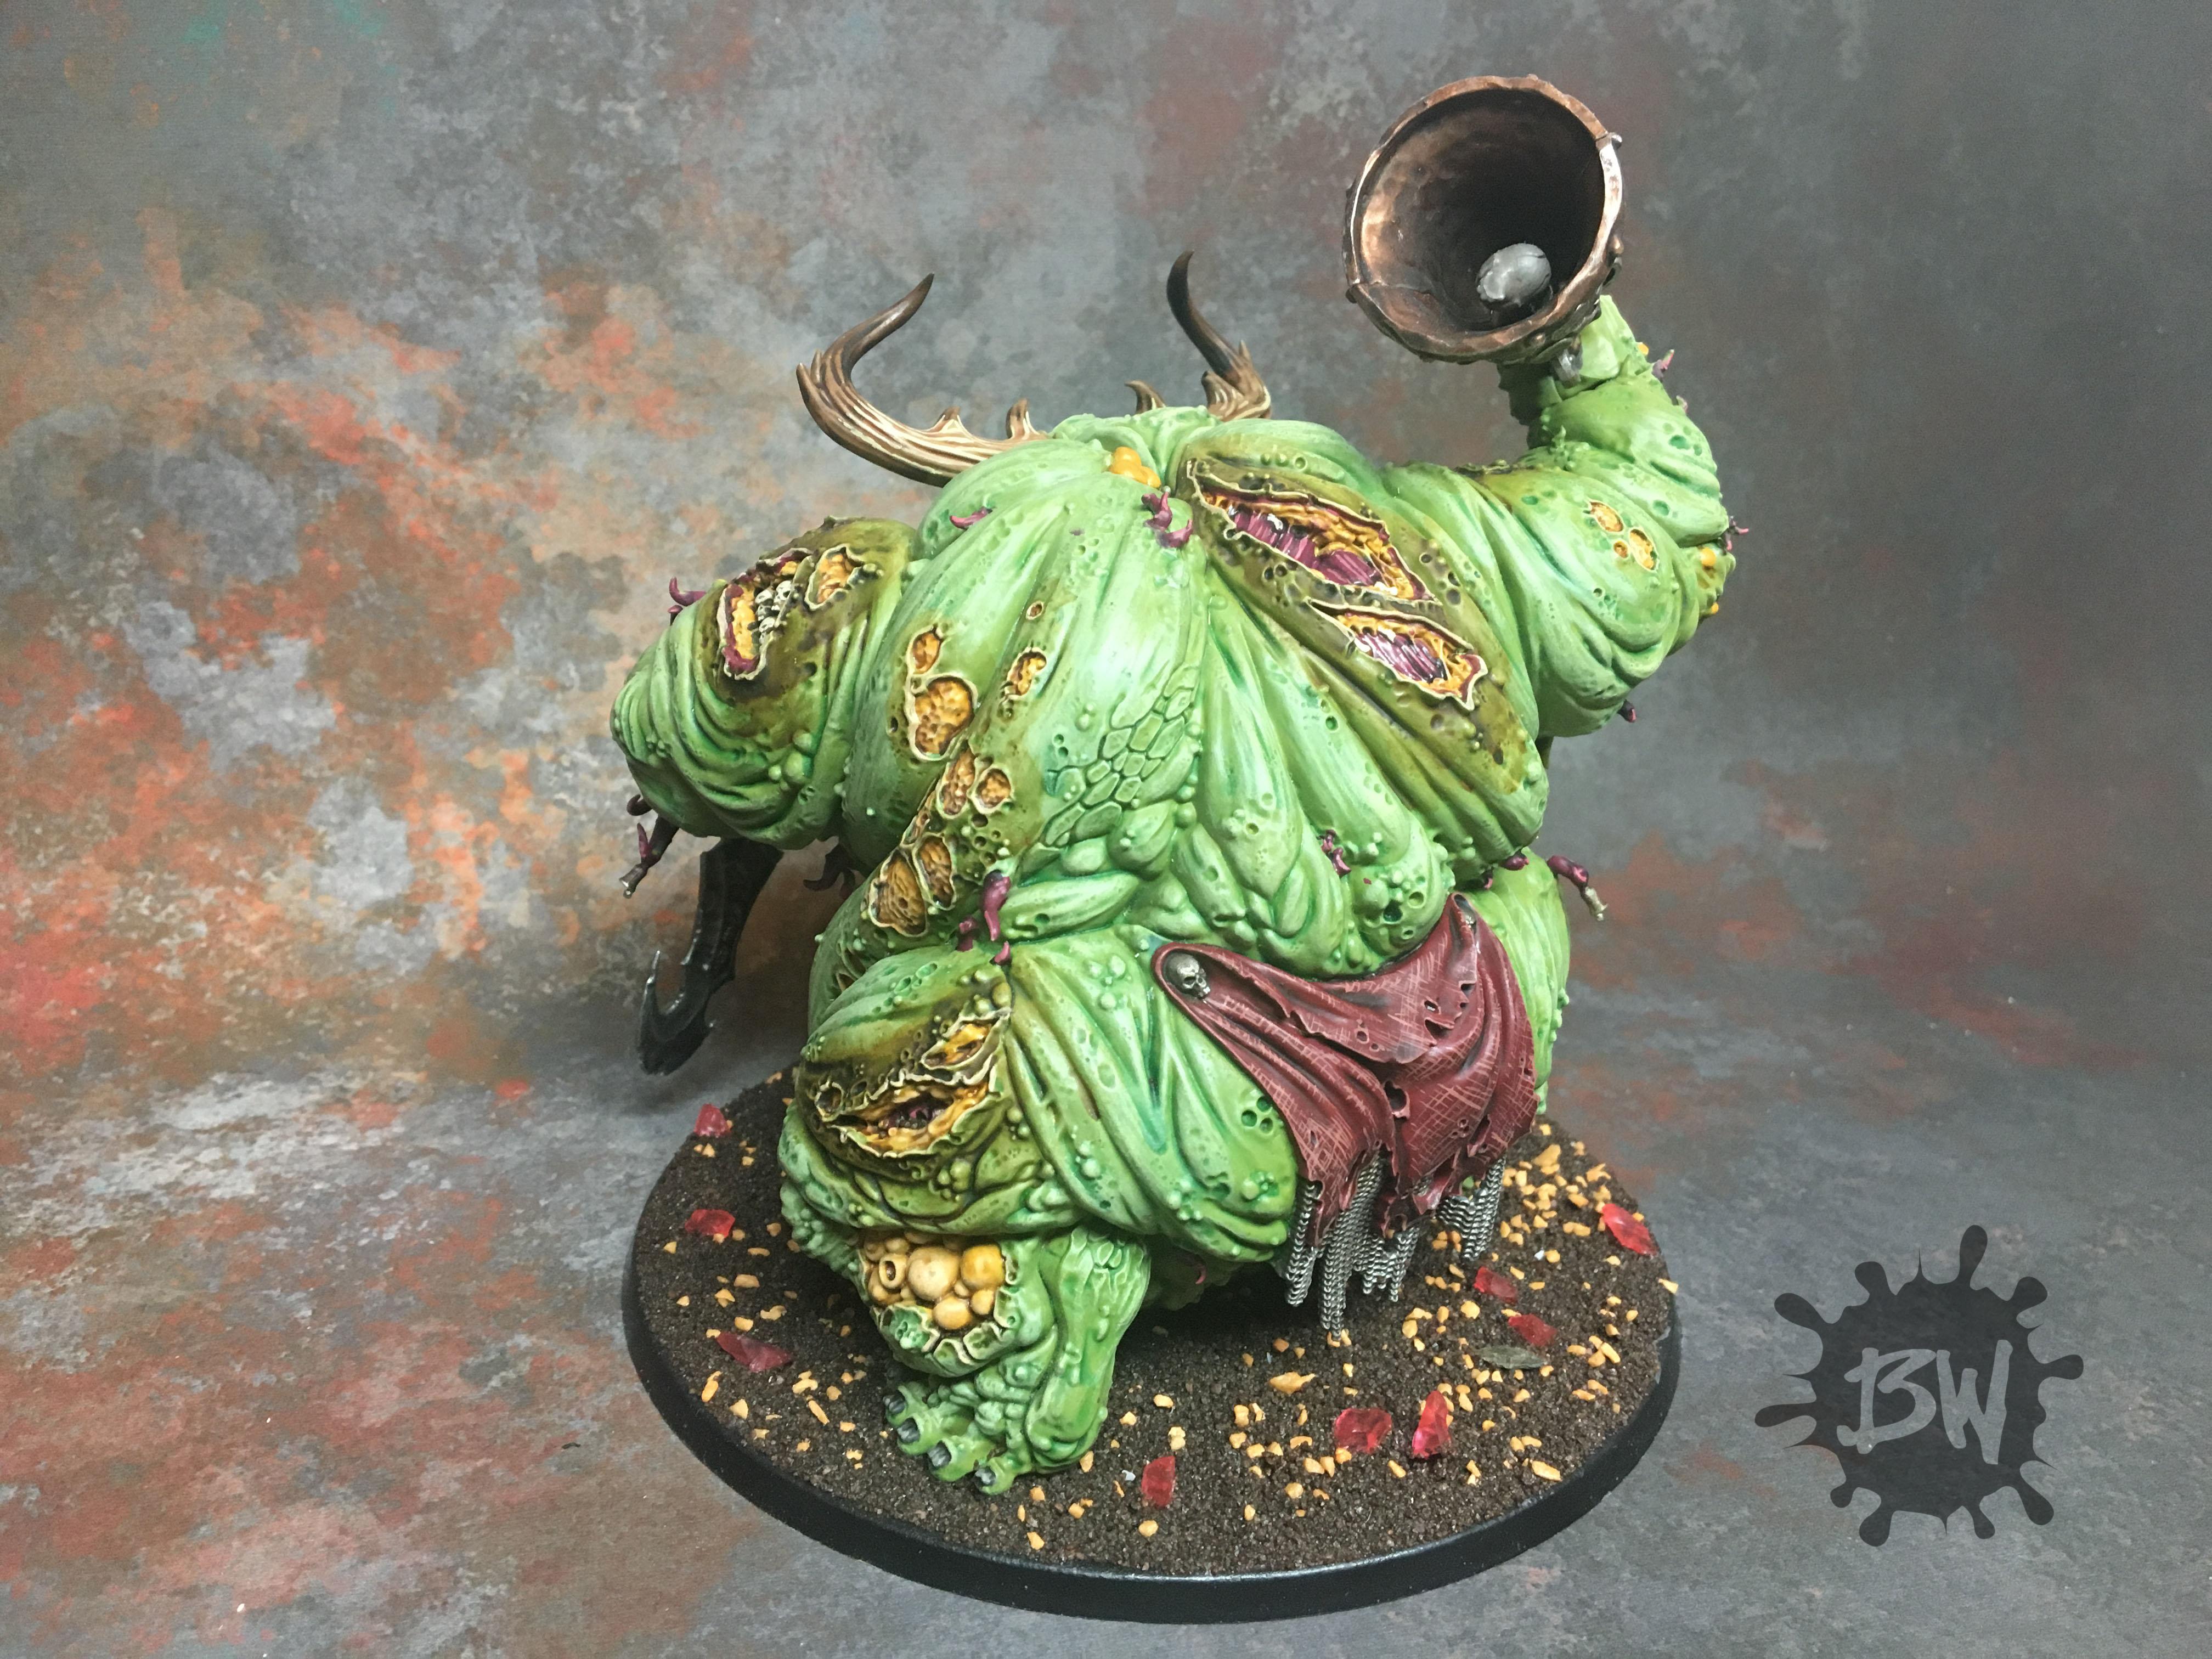 Bawpainting, Chaos, Commission, Daemons, Games Workshop, Great Unclean One, Guo, Nurgle, Painting, Warhammer 40,000